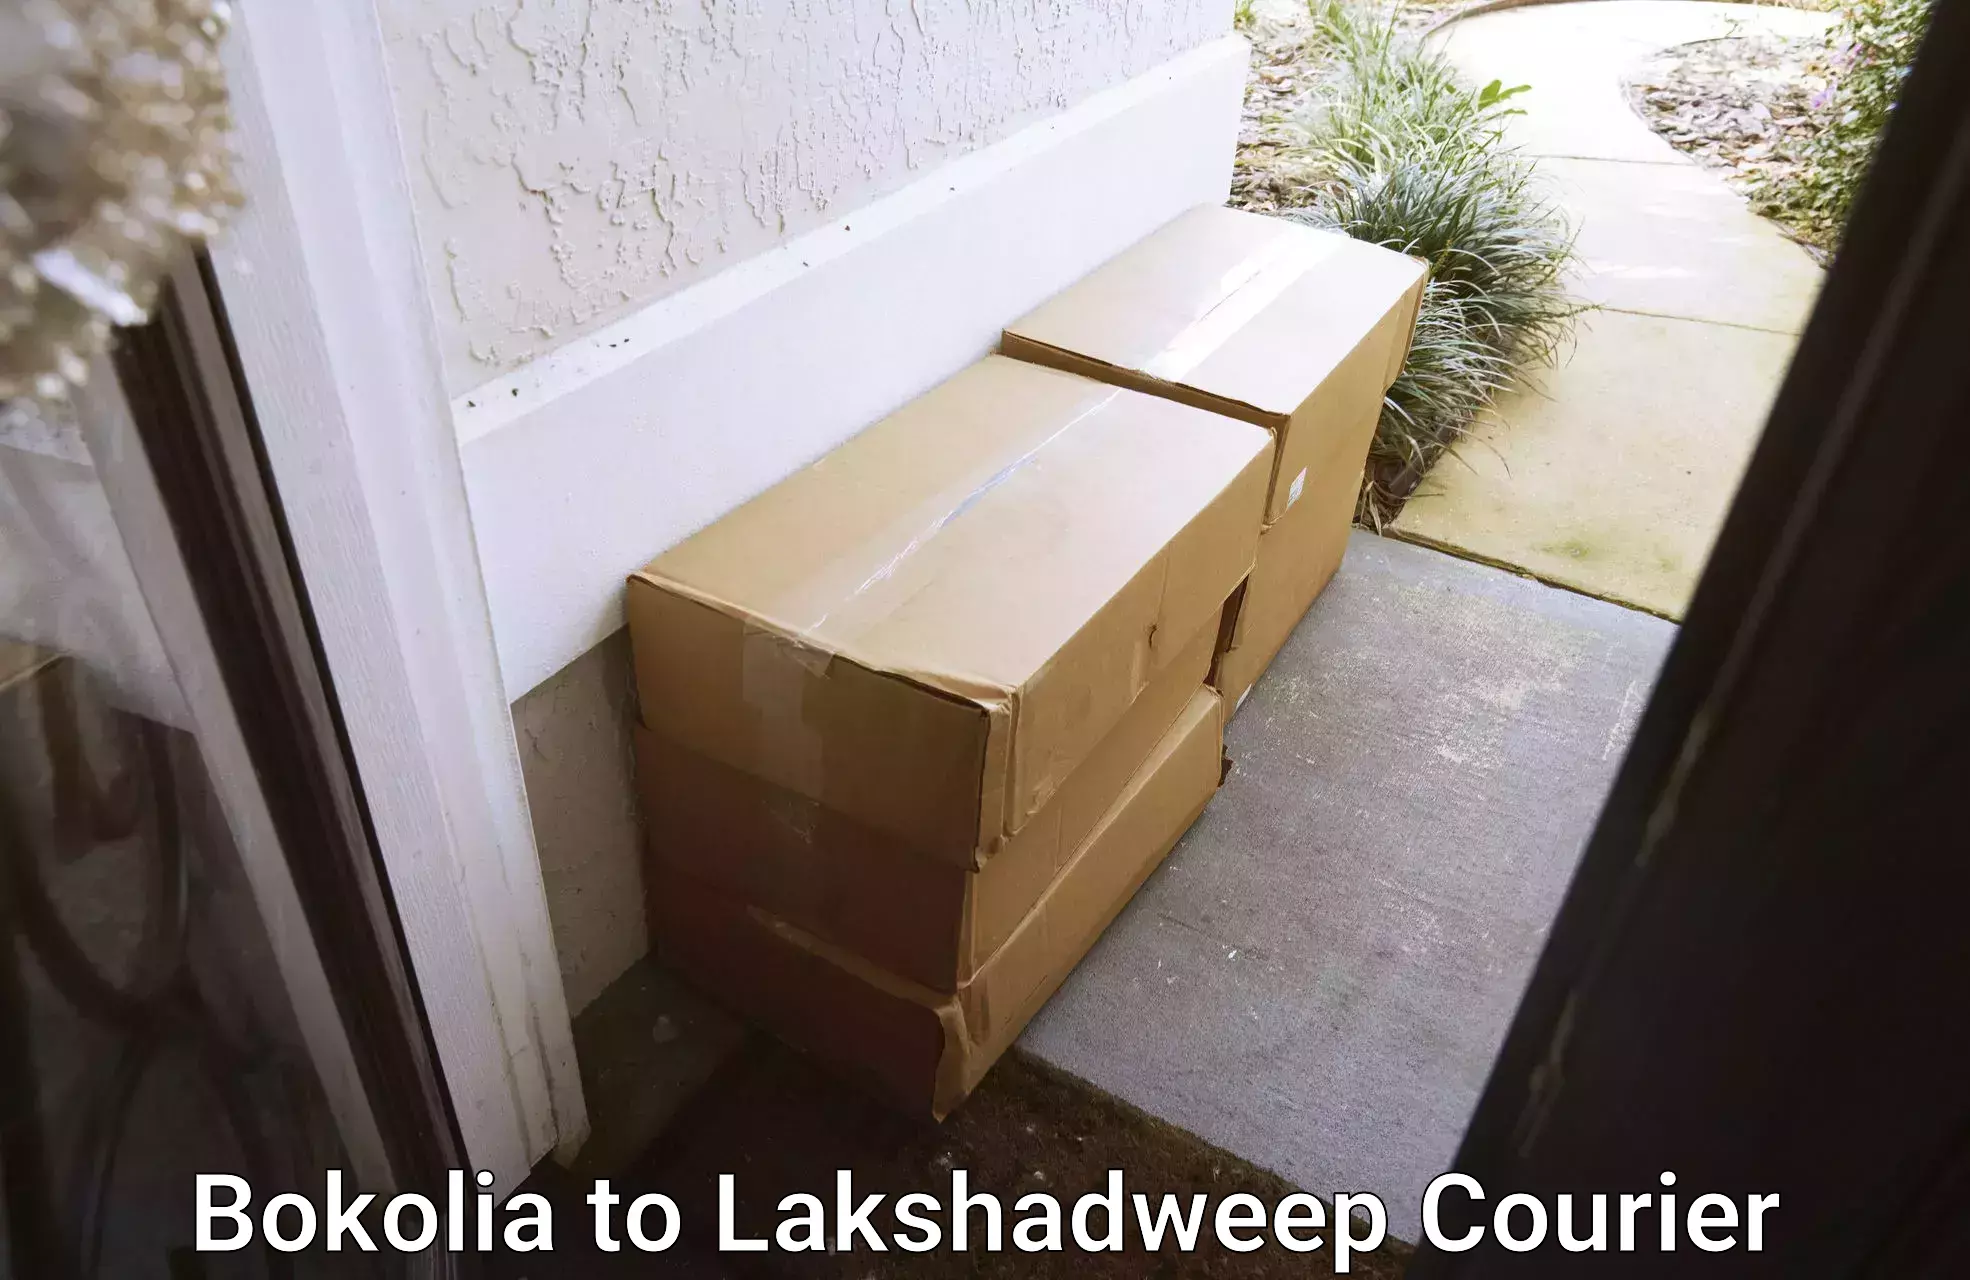 24/7 courier service Bokolia to Lakshadweep